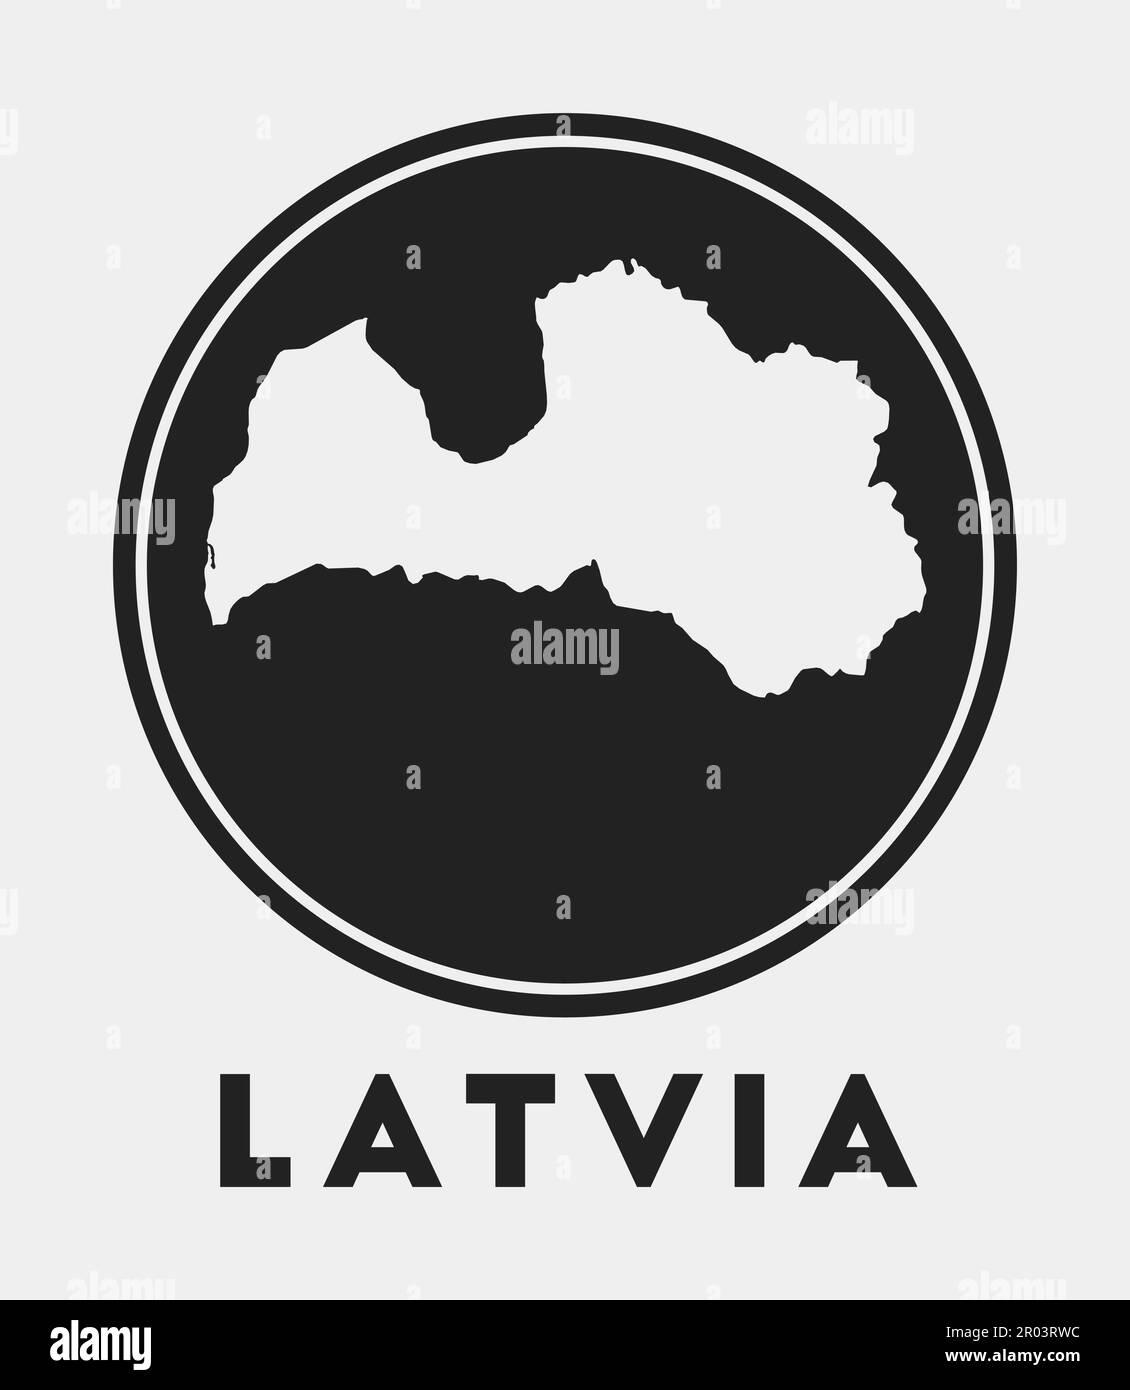 Latvia icon. Round logo with country map and title. Stylish Latvia badge with map. Vector illustration. Stock Vector